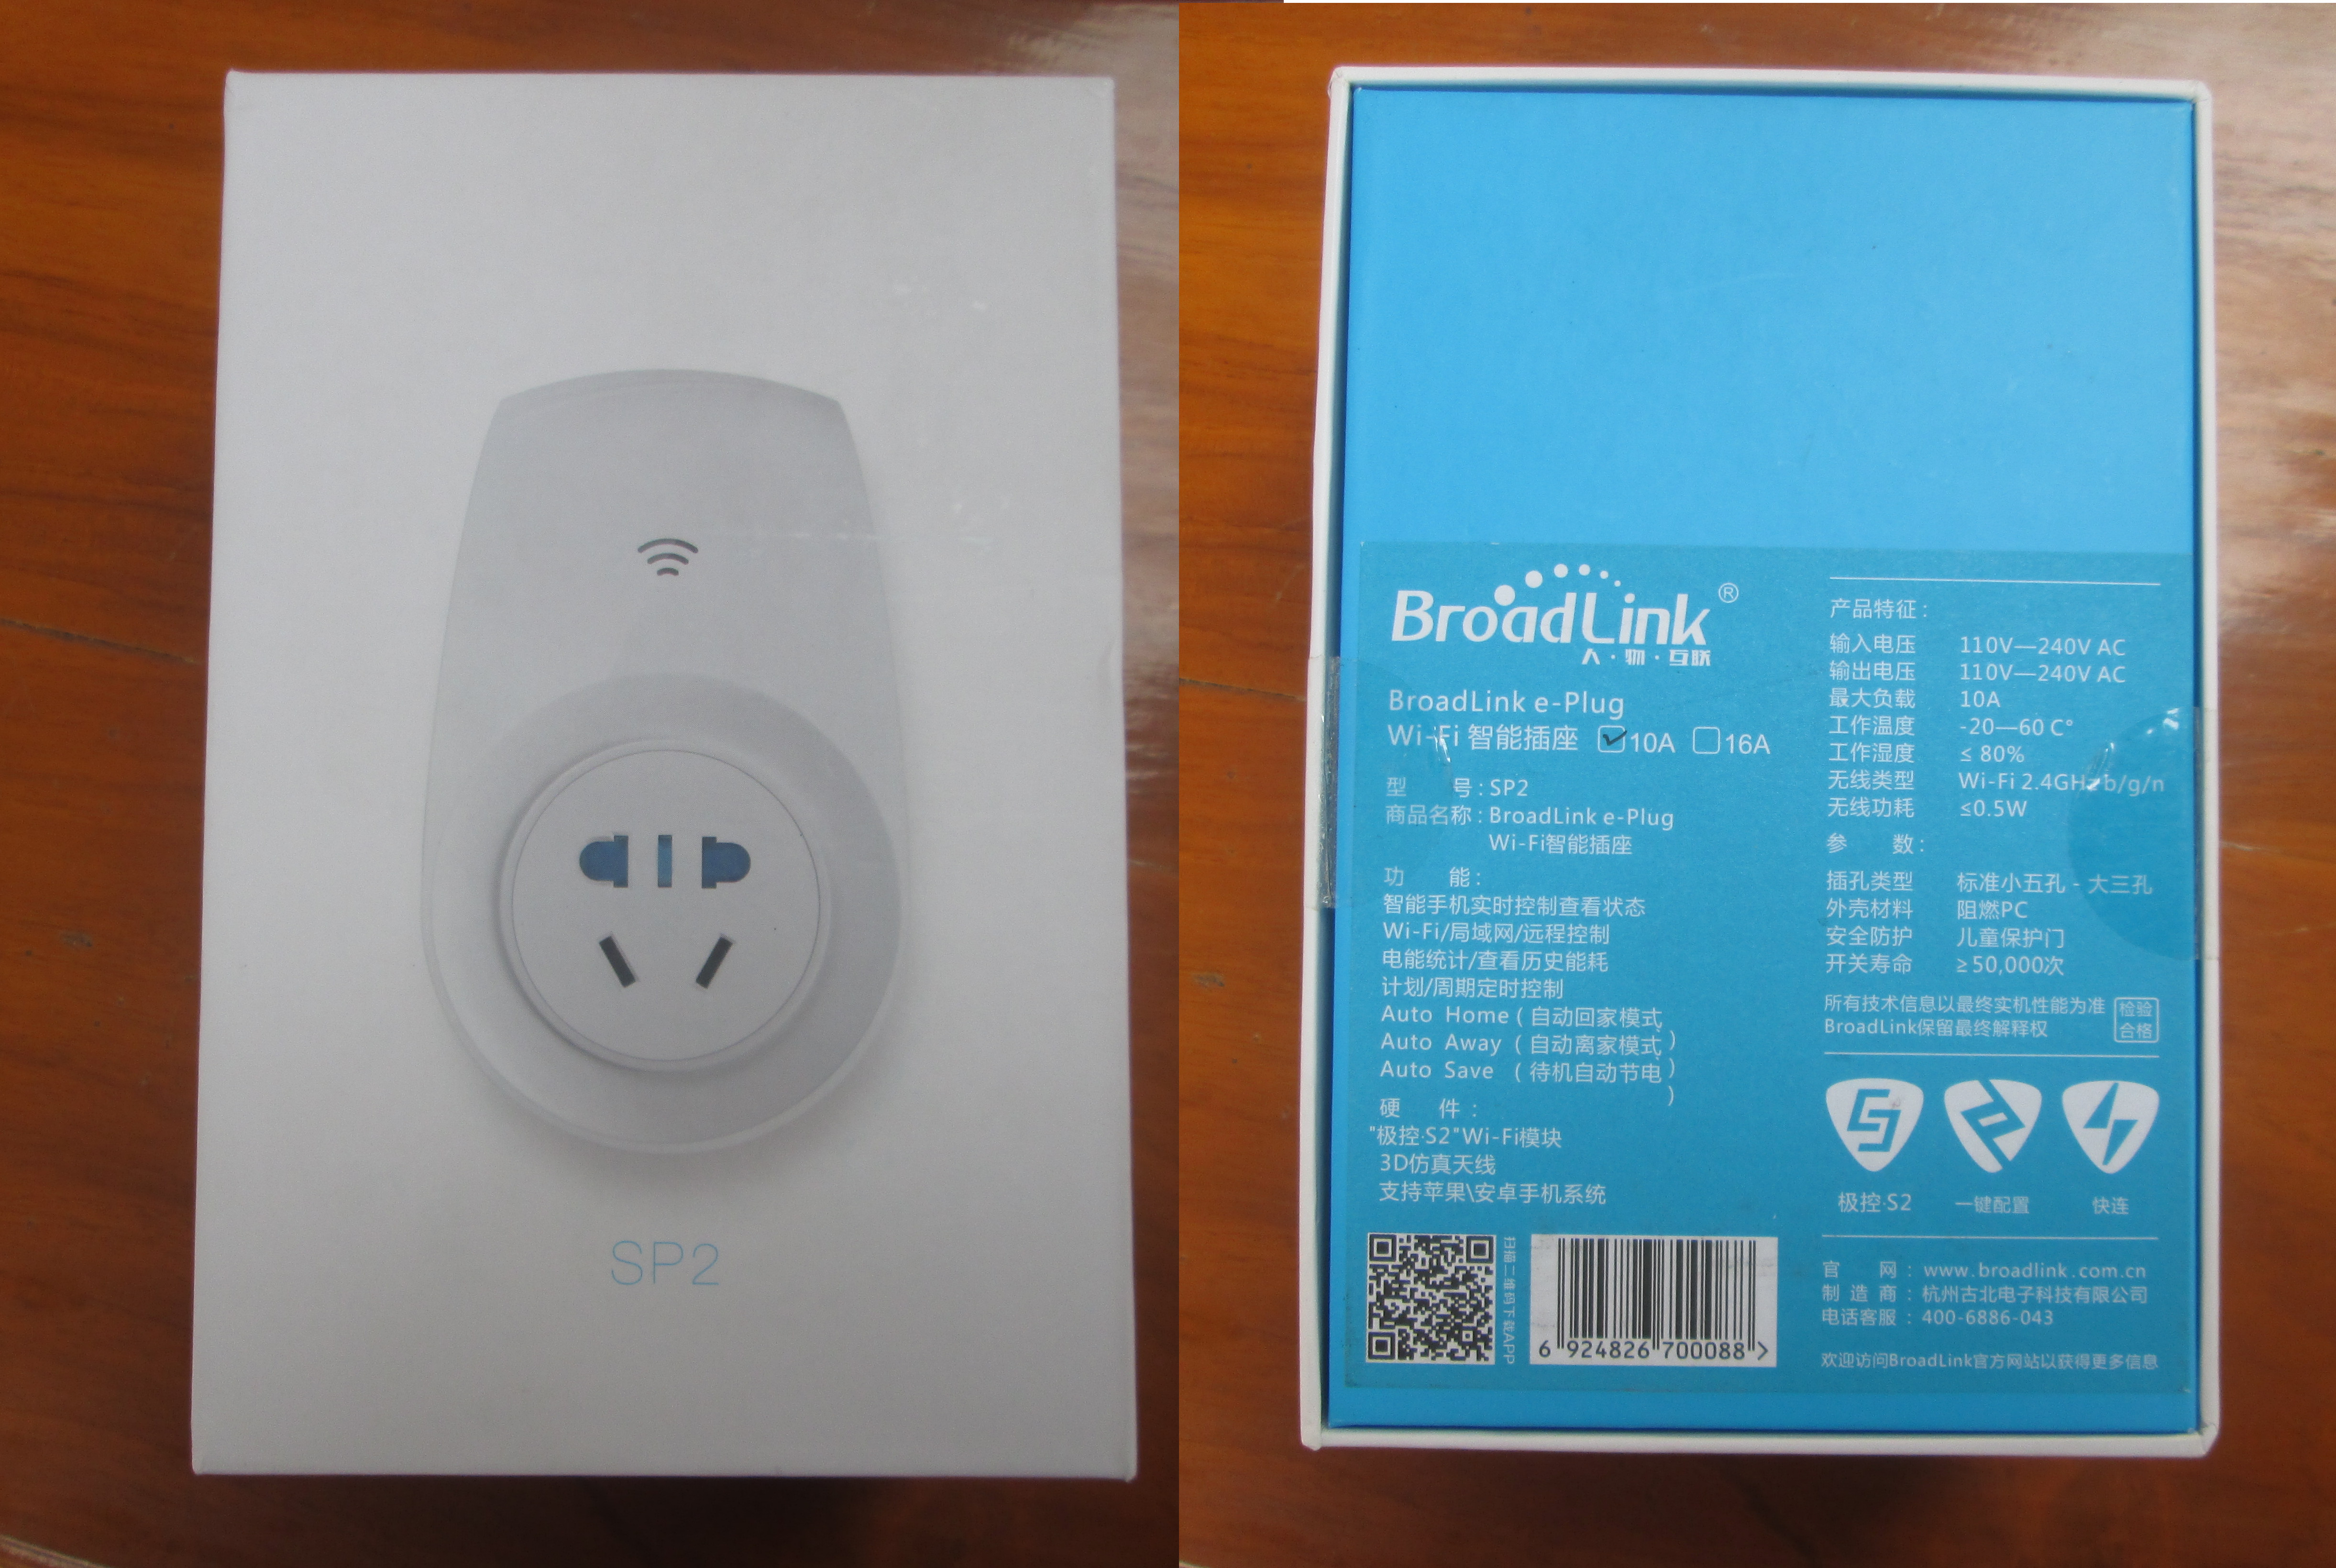 SP1 Remote Control Smart AC Plug with Remote Sensing Support